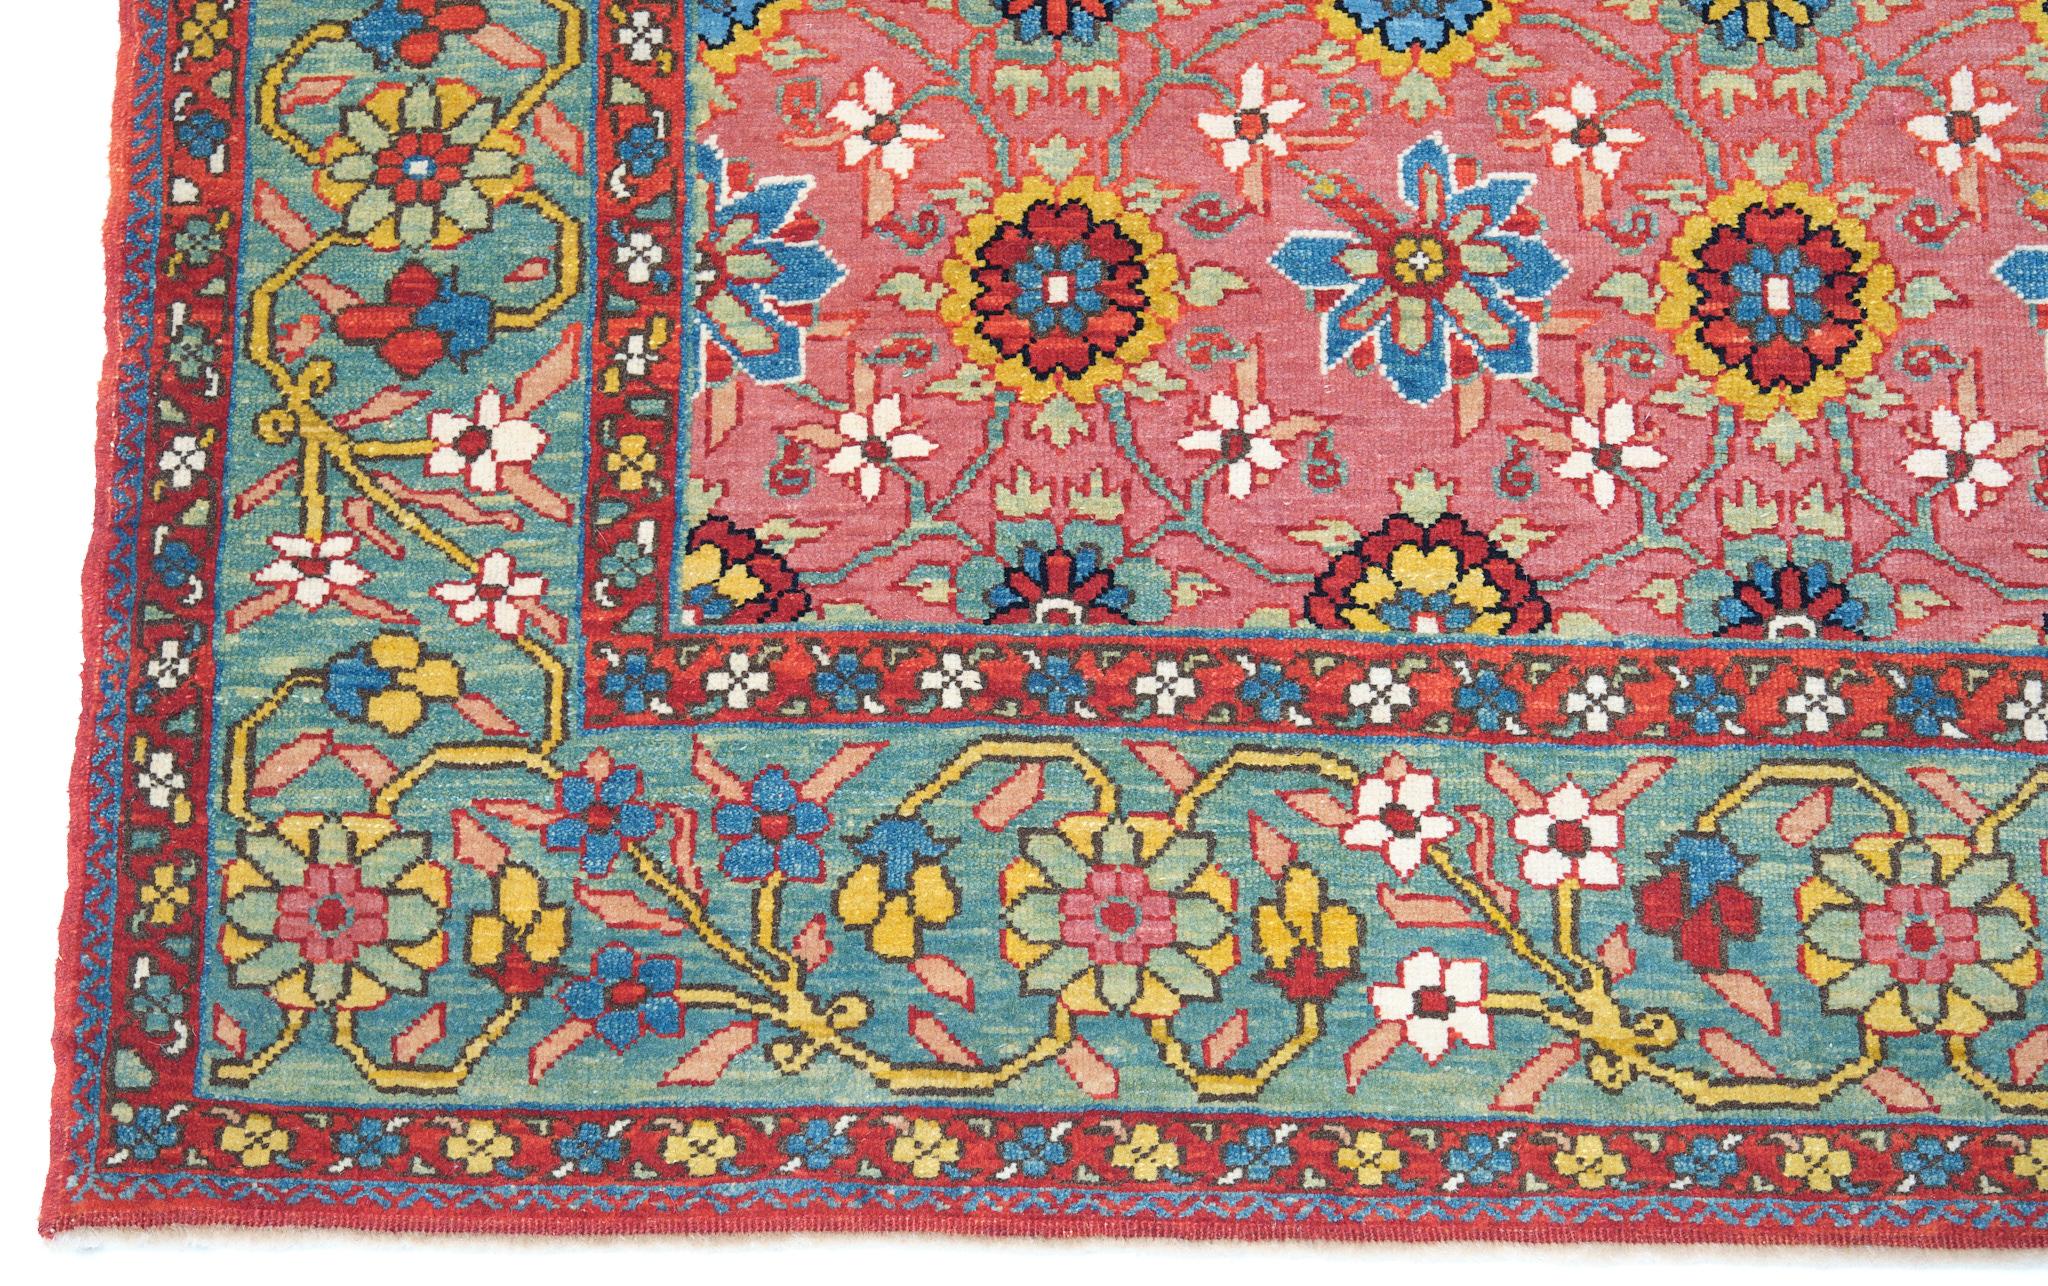 Vegetable Dyed Ararat Rugs Mina Khani Rug, 19th Century Persian Revival Carpet, Natural Dyed For Sale